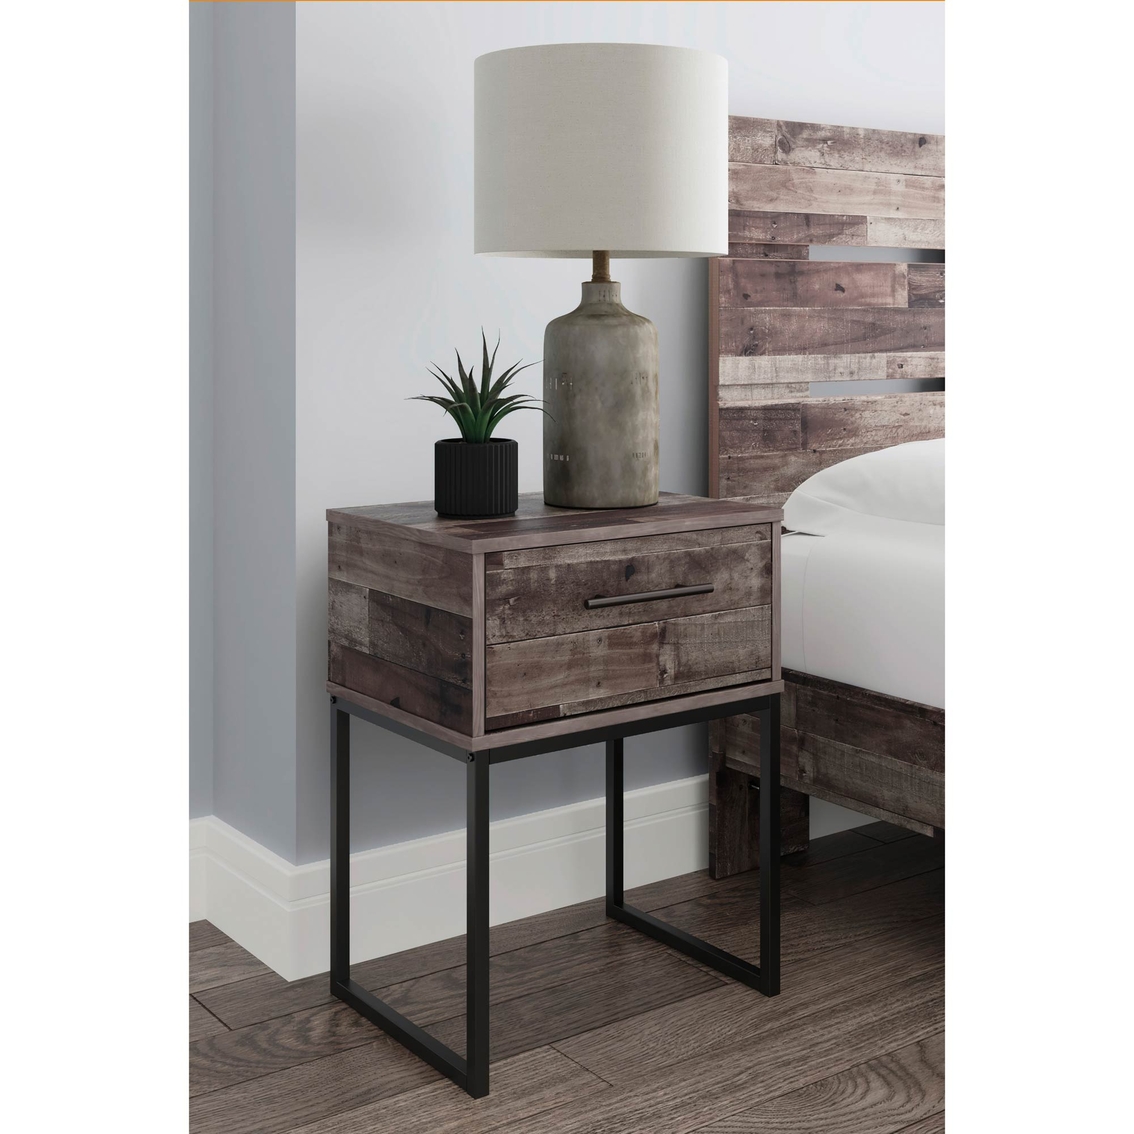 Signature Design by Ashley Ready to Assemble Neilsville Nightstand - Image 5 of 7